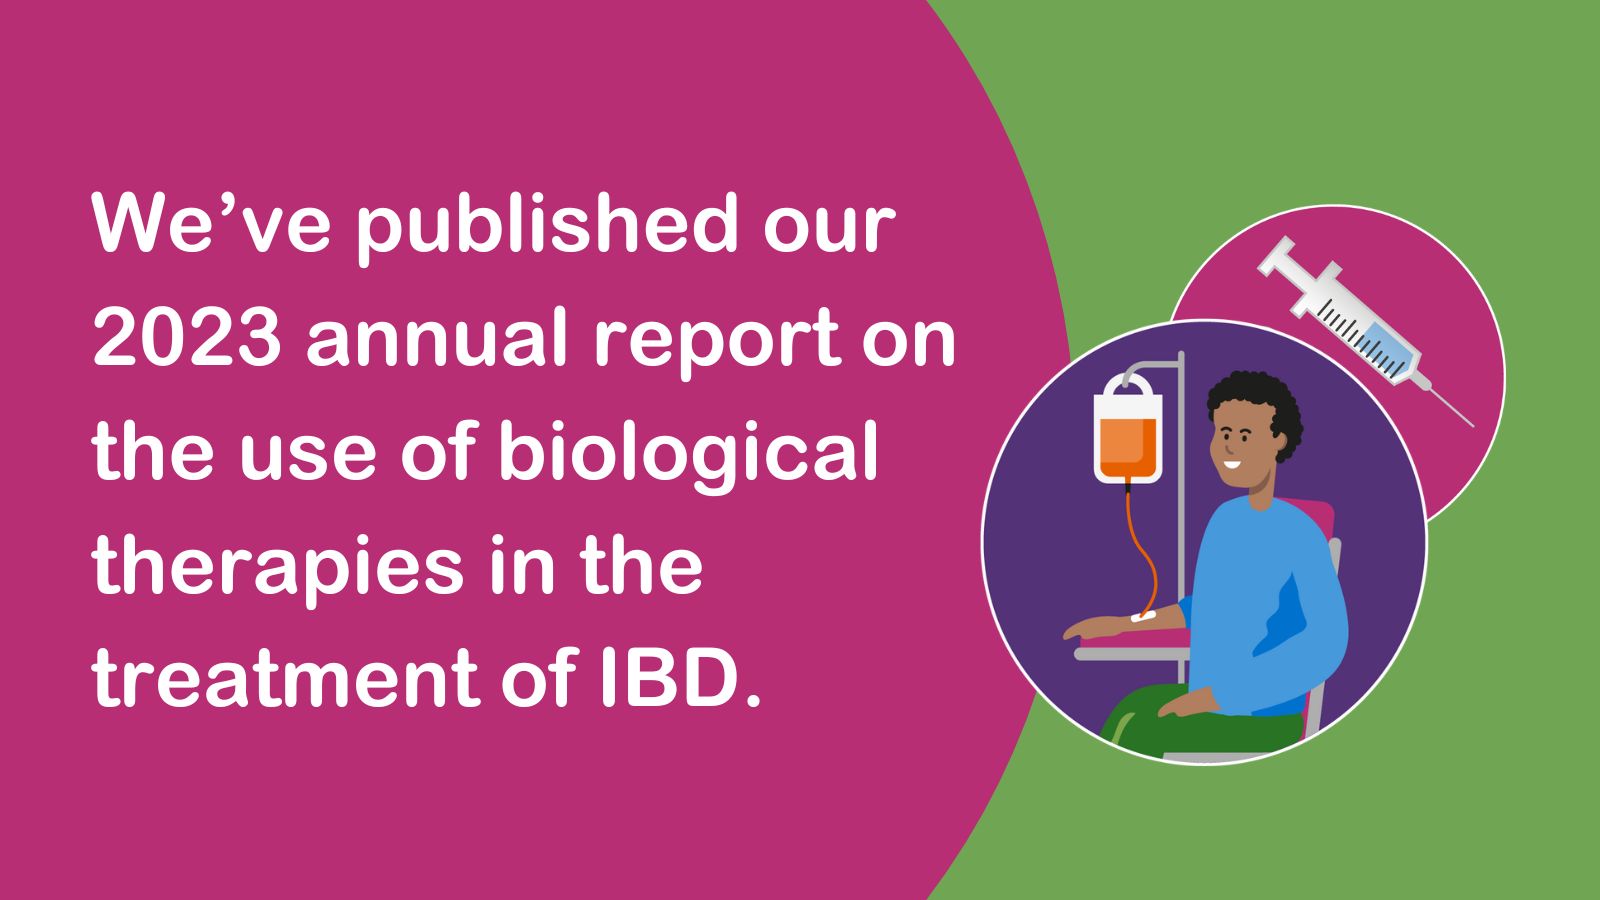 We've published our 2023 annual report on the use of biological therapies in the treatment of IBD.